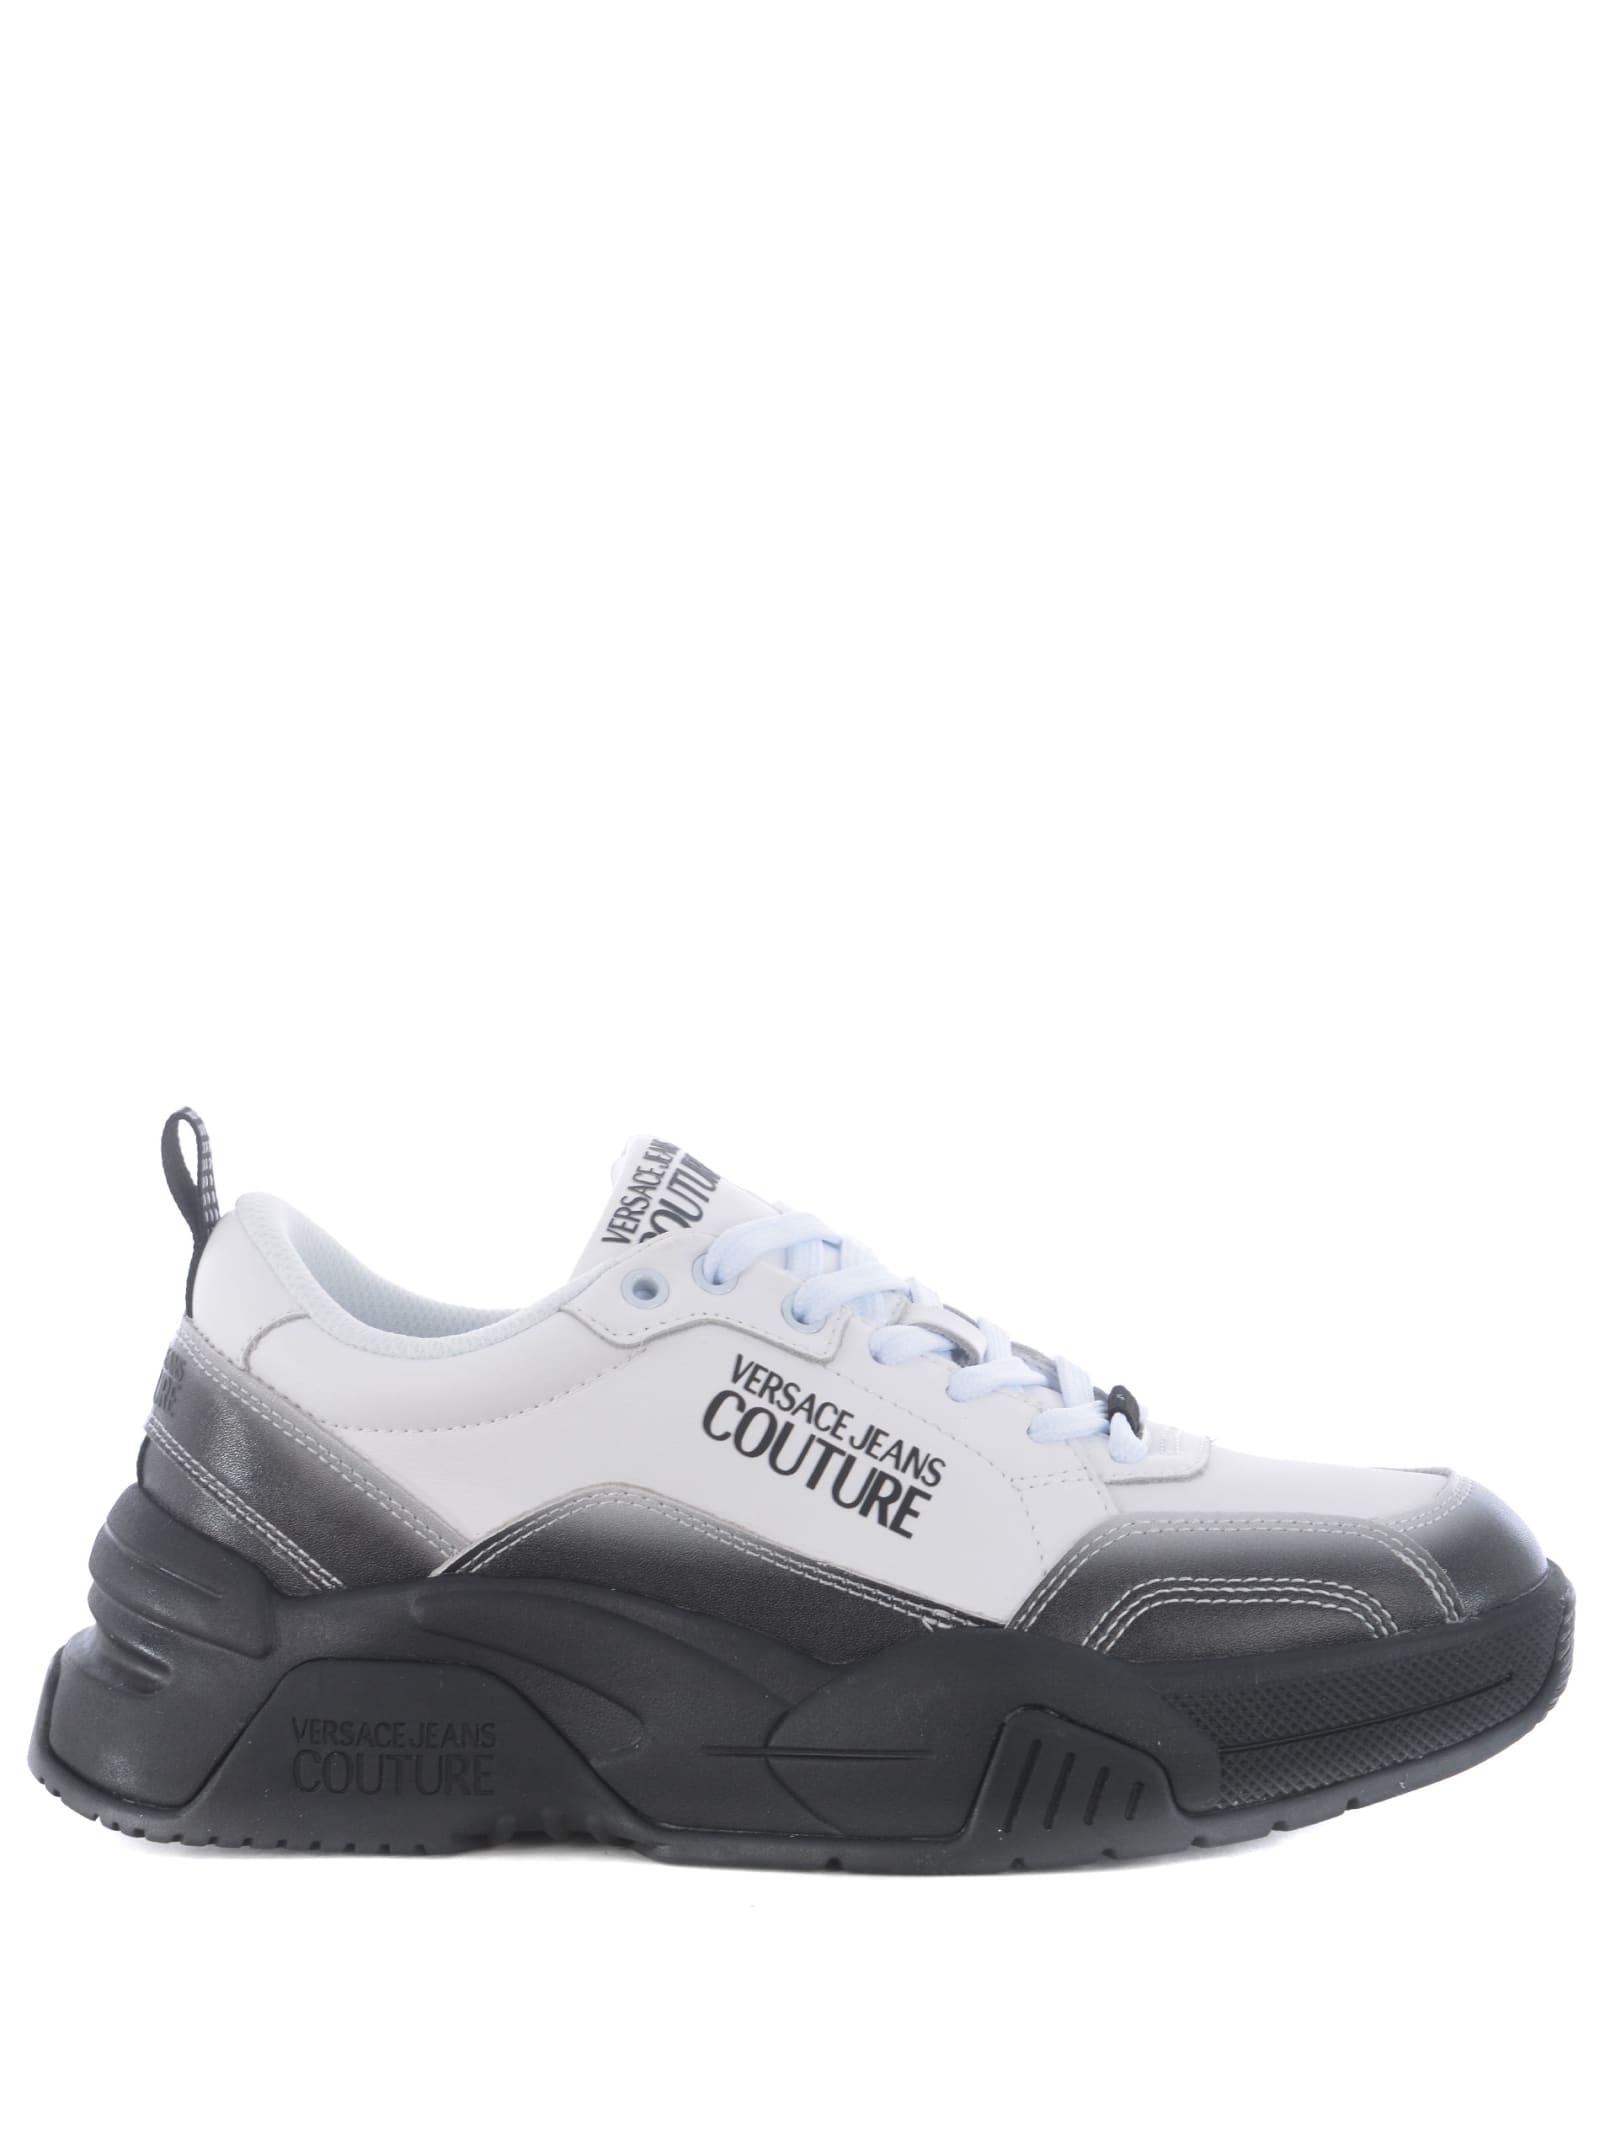 versace jeans couture leather sneakers